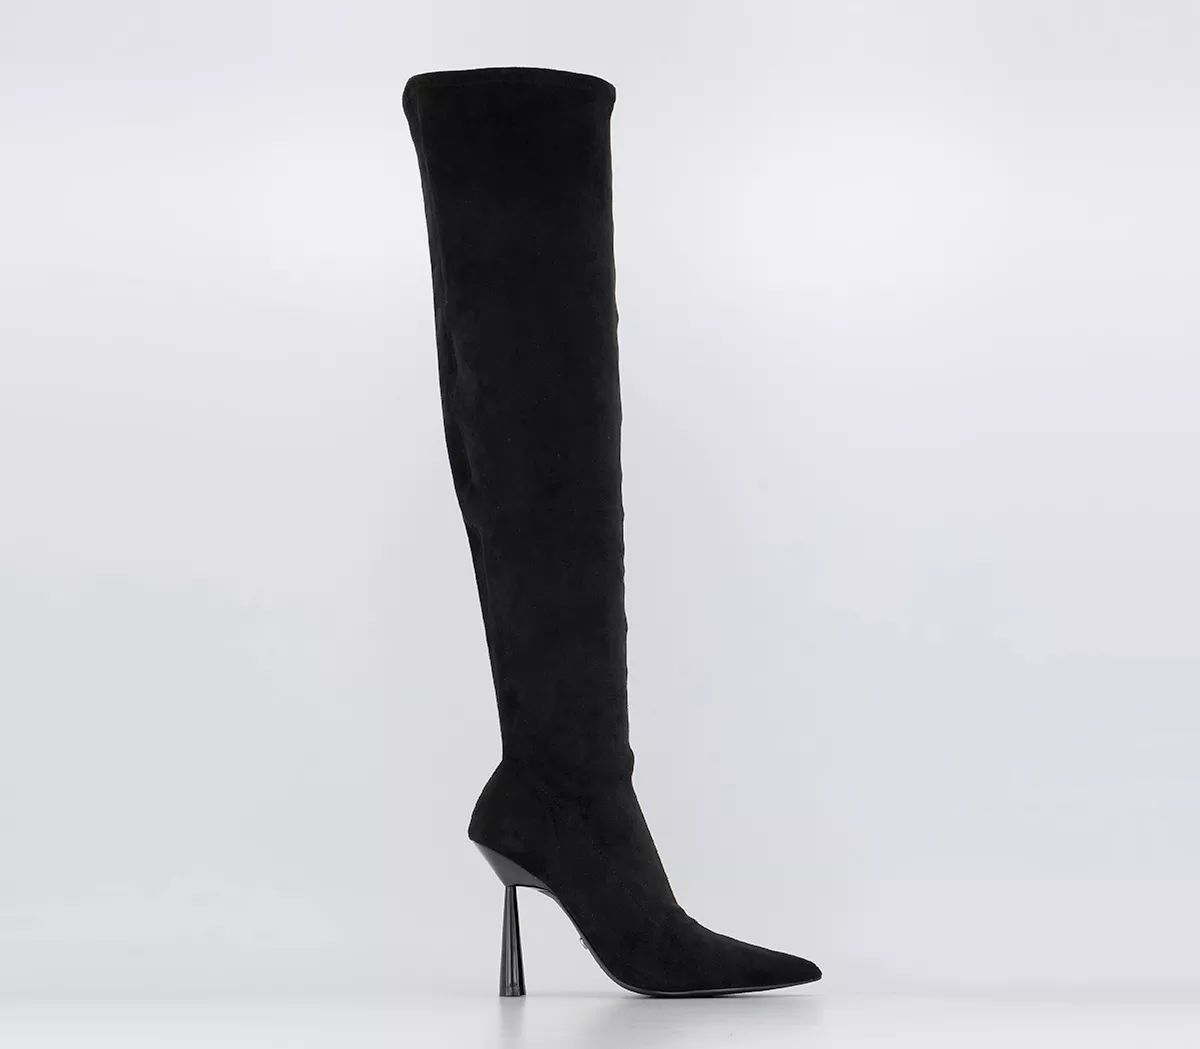 OFFICE Kami Over The Knee Point Stiletto Boots Black - Knee High Boots | OFFICE London (UK)